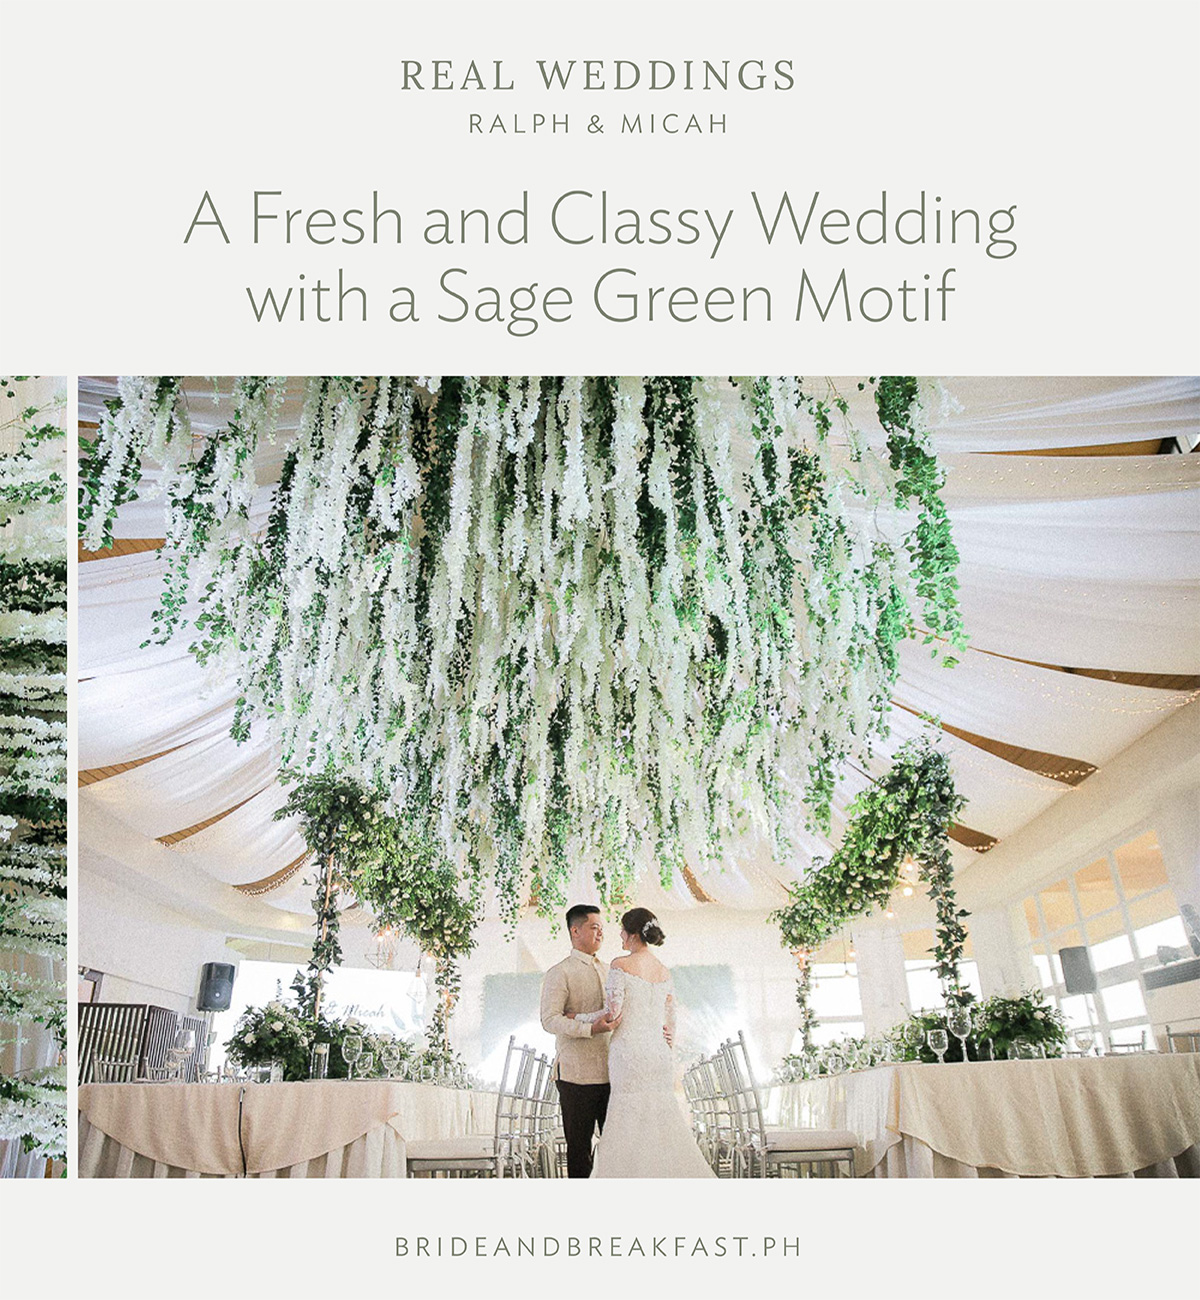 A Fresh and Classy Wedding with a Sage Green Motif